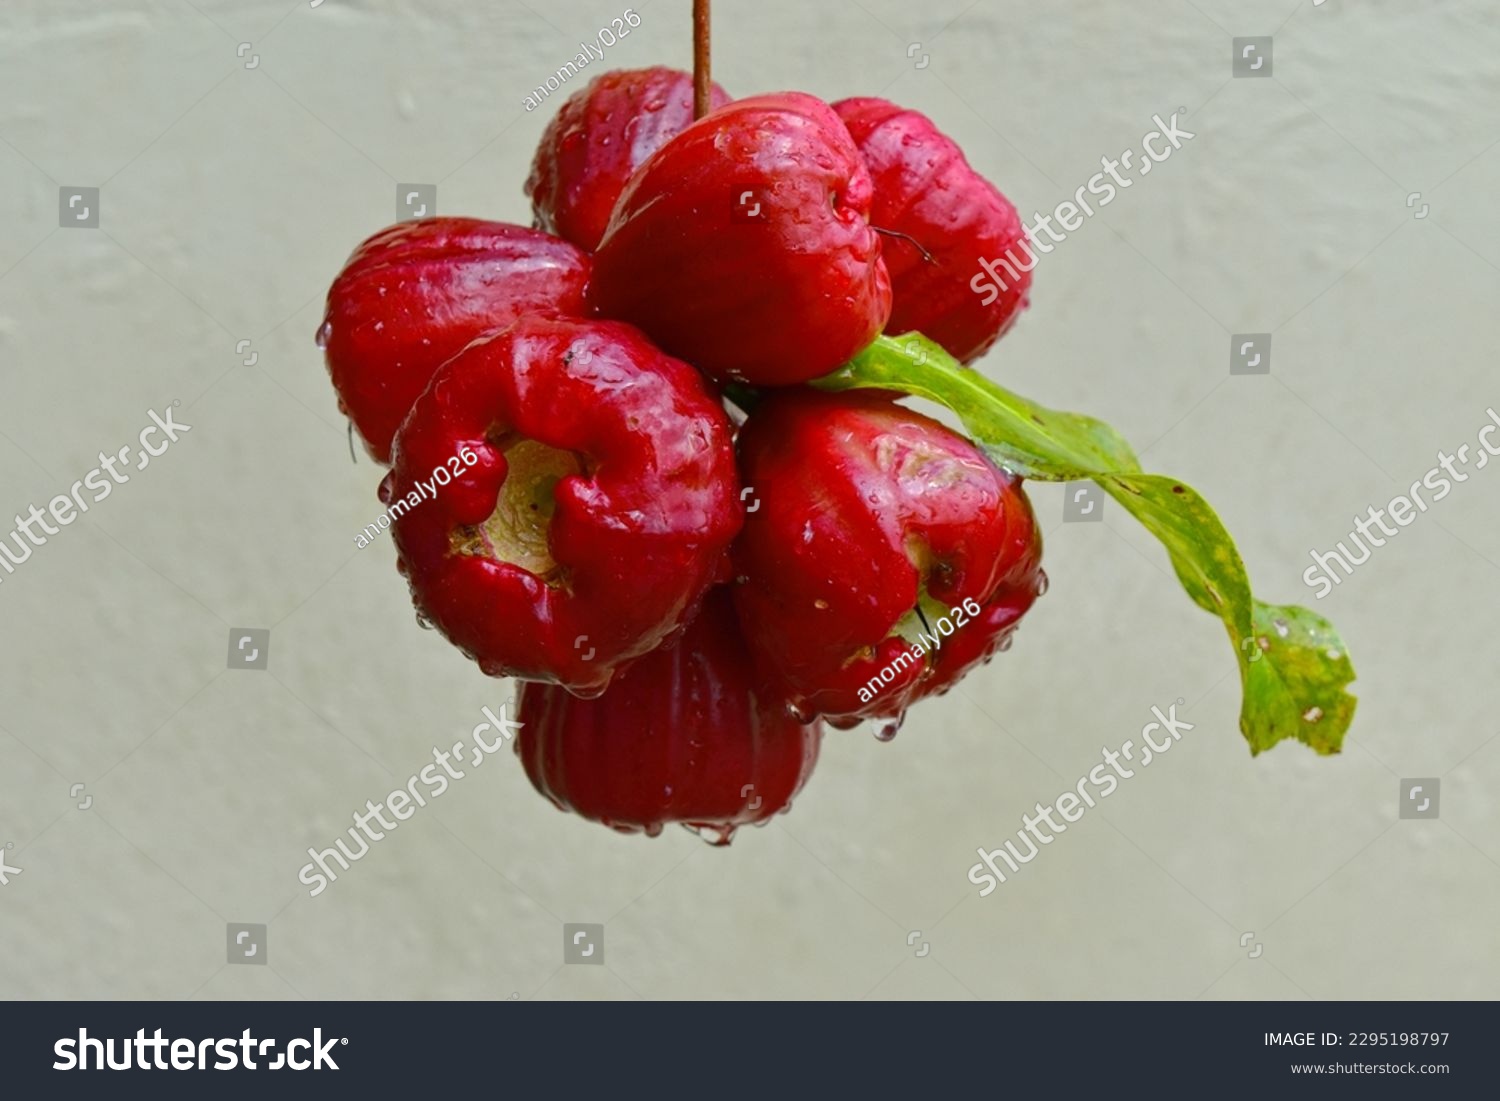 a sprig of fruit called water guava, water apple, or rose apple that is red and fresh. #2295198797